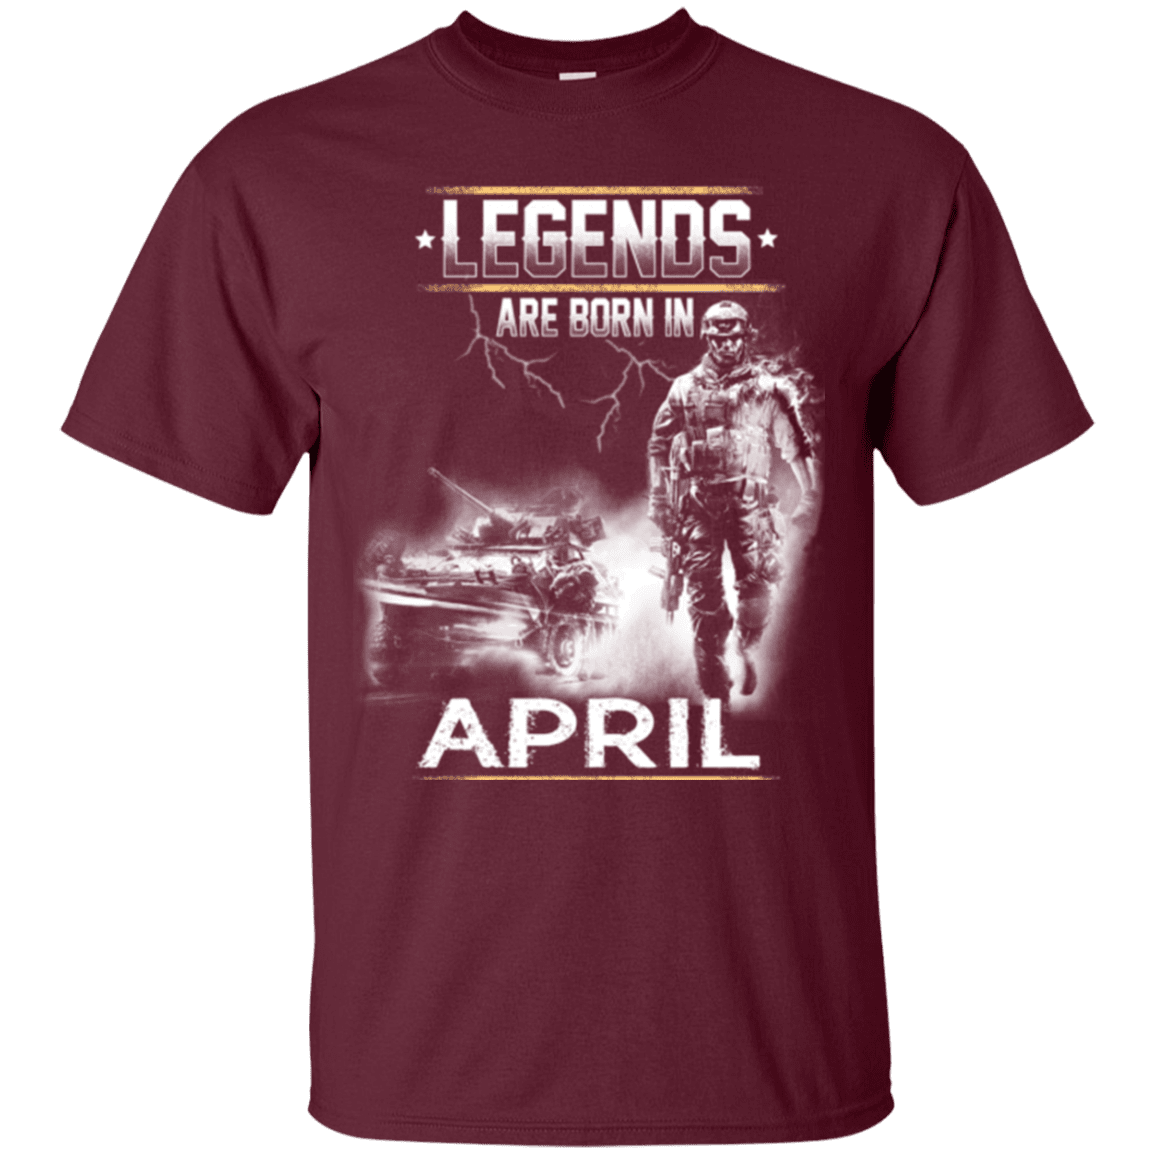 Military T-Shirt "LEGENDS ARE BORN IN APRIL"-TShirt-General-Veterans Nation